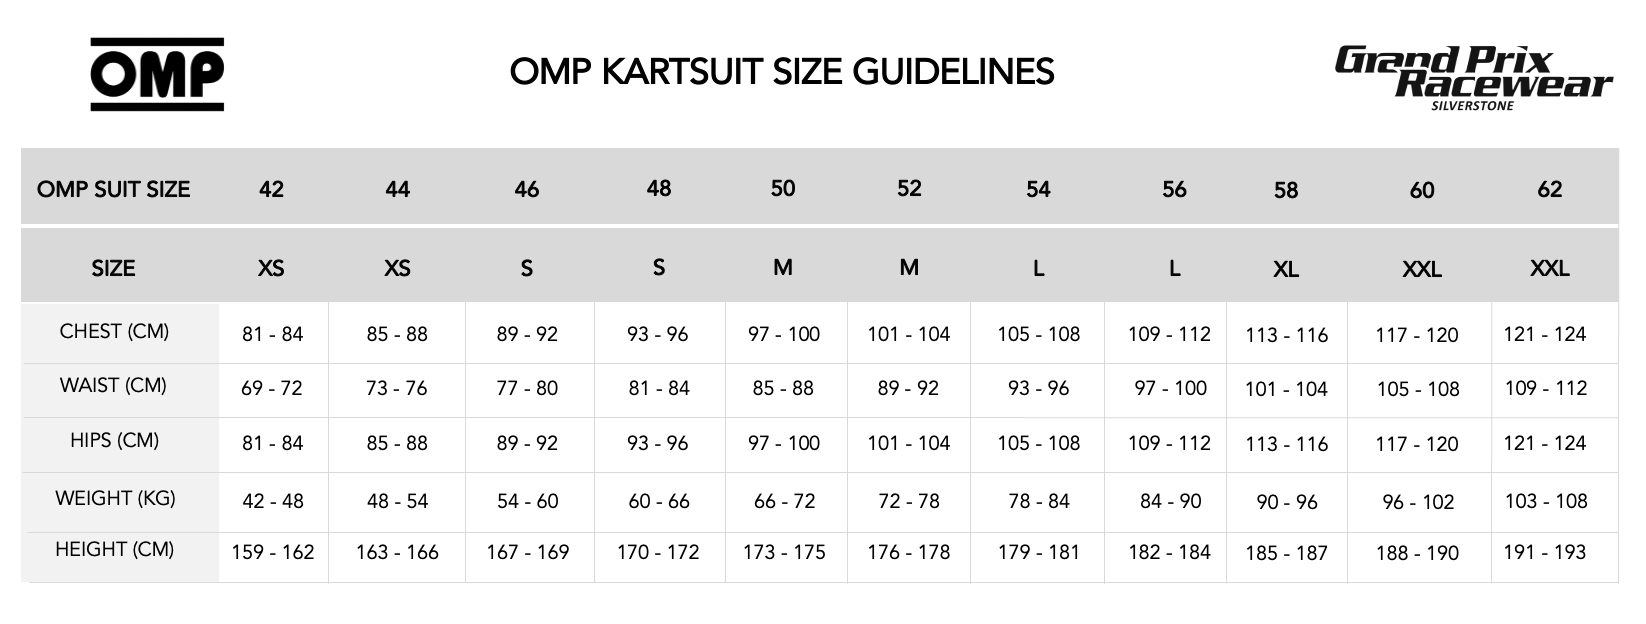 Size Guide for OMP Kart Suits available from www.gprdirect.com